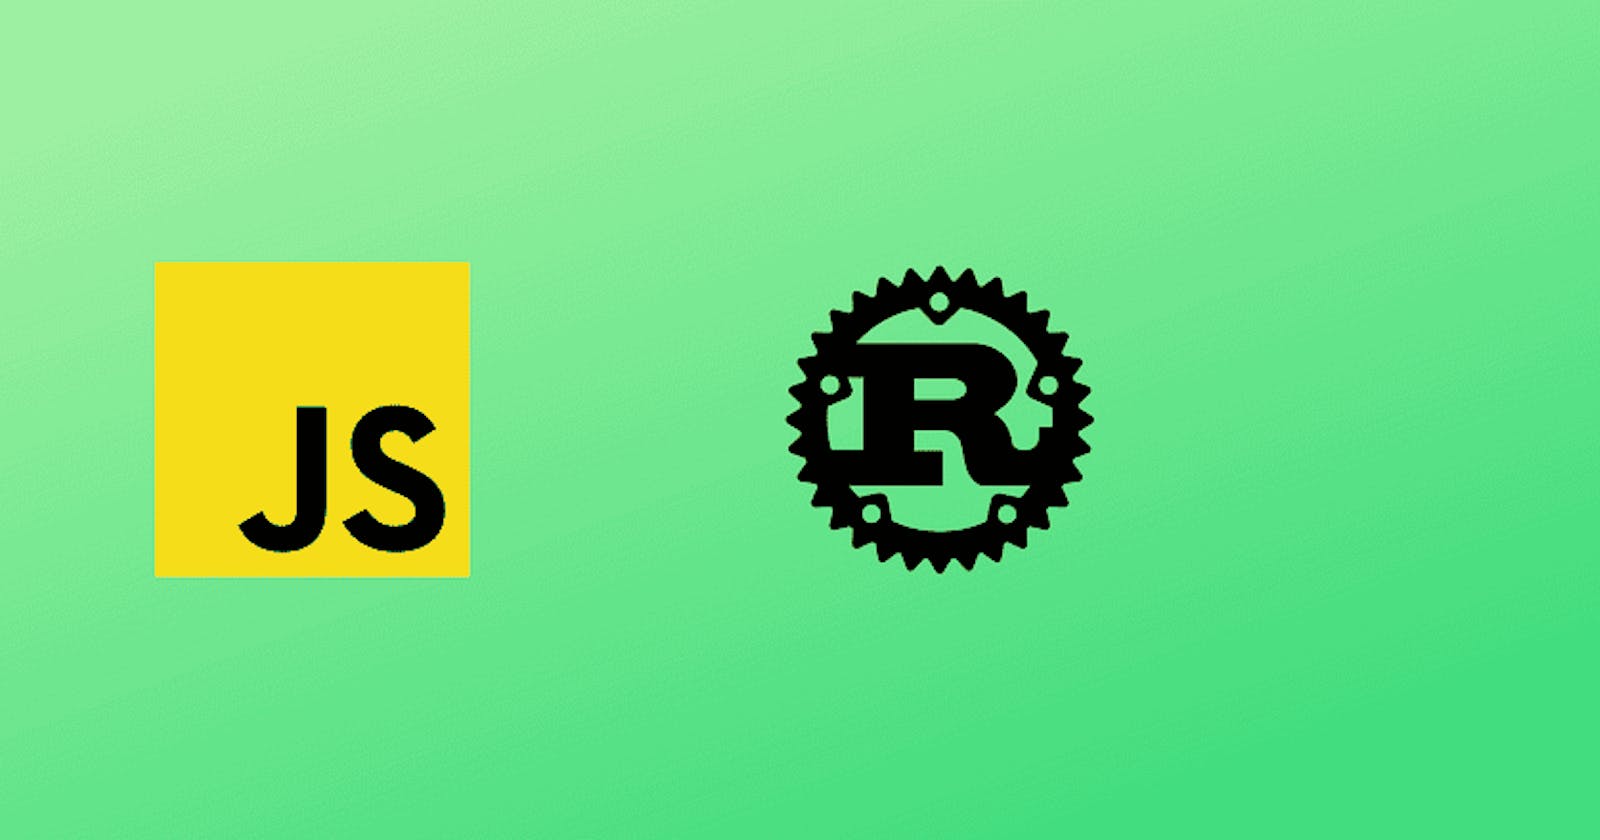 Why choose Rust for your upcoming projects?